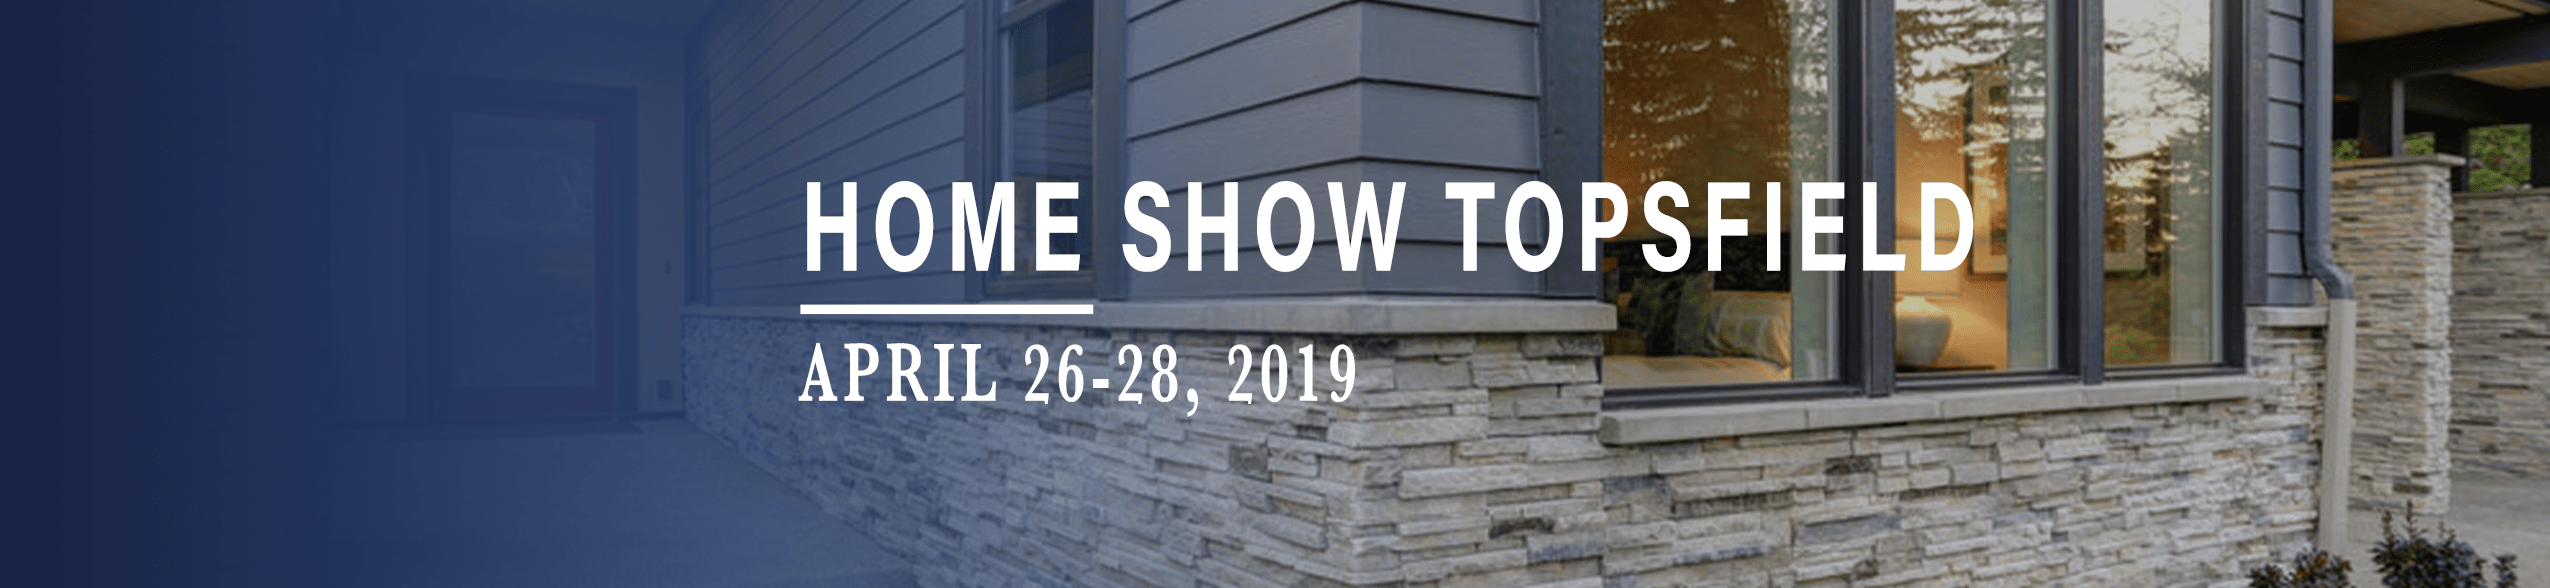 2019 Home Show at Topsfield Fairgrounds